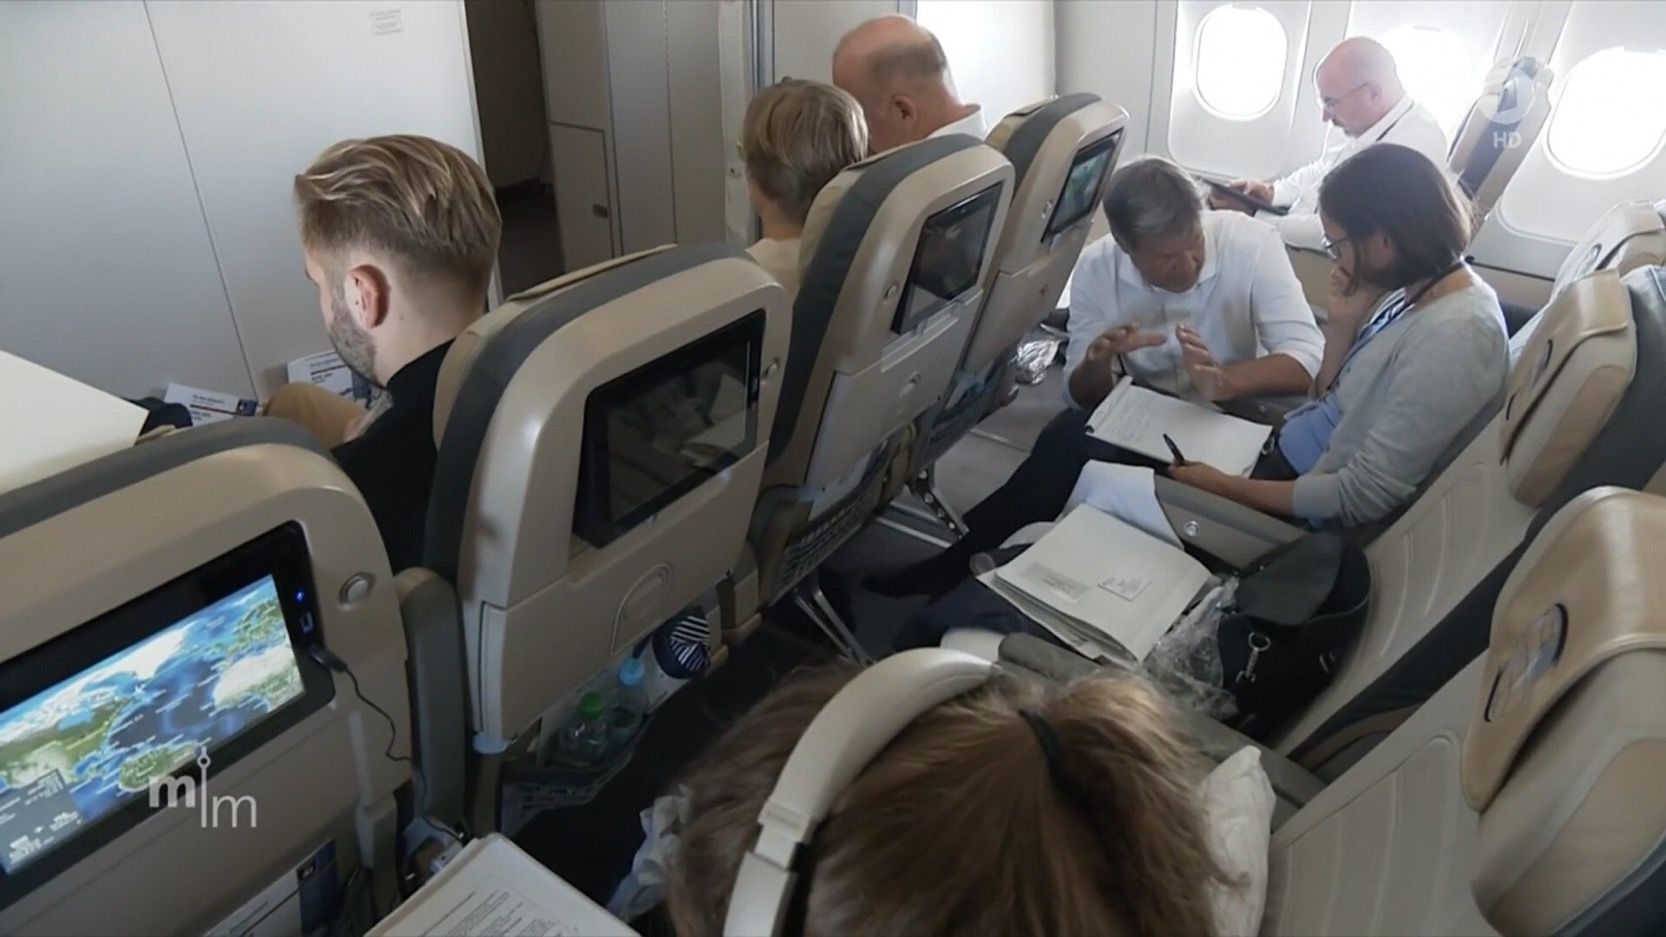 Masks are now compulsory again on German government planes after public outcry about maskless Scholz, Habeck, and journalists on the flight to Canada